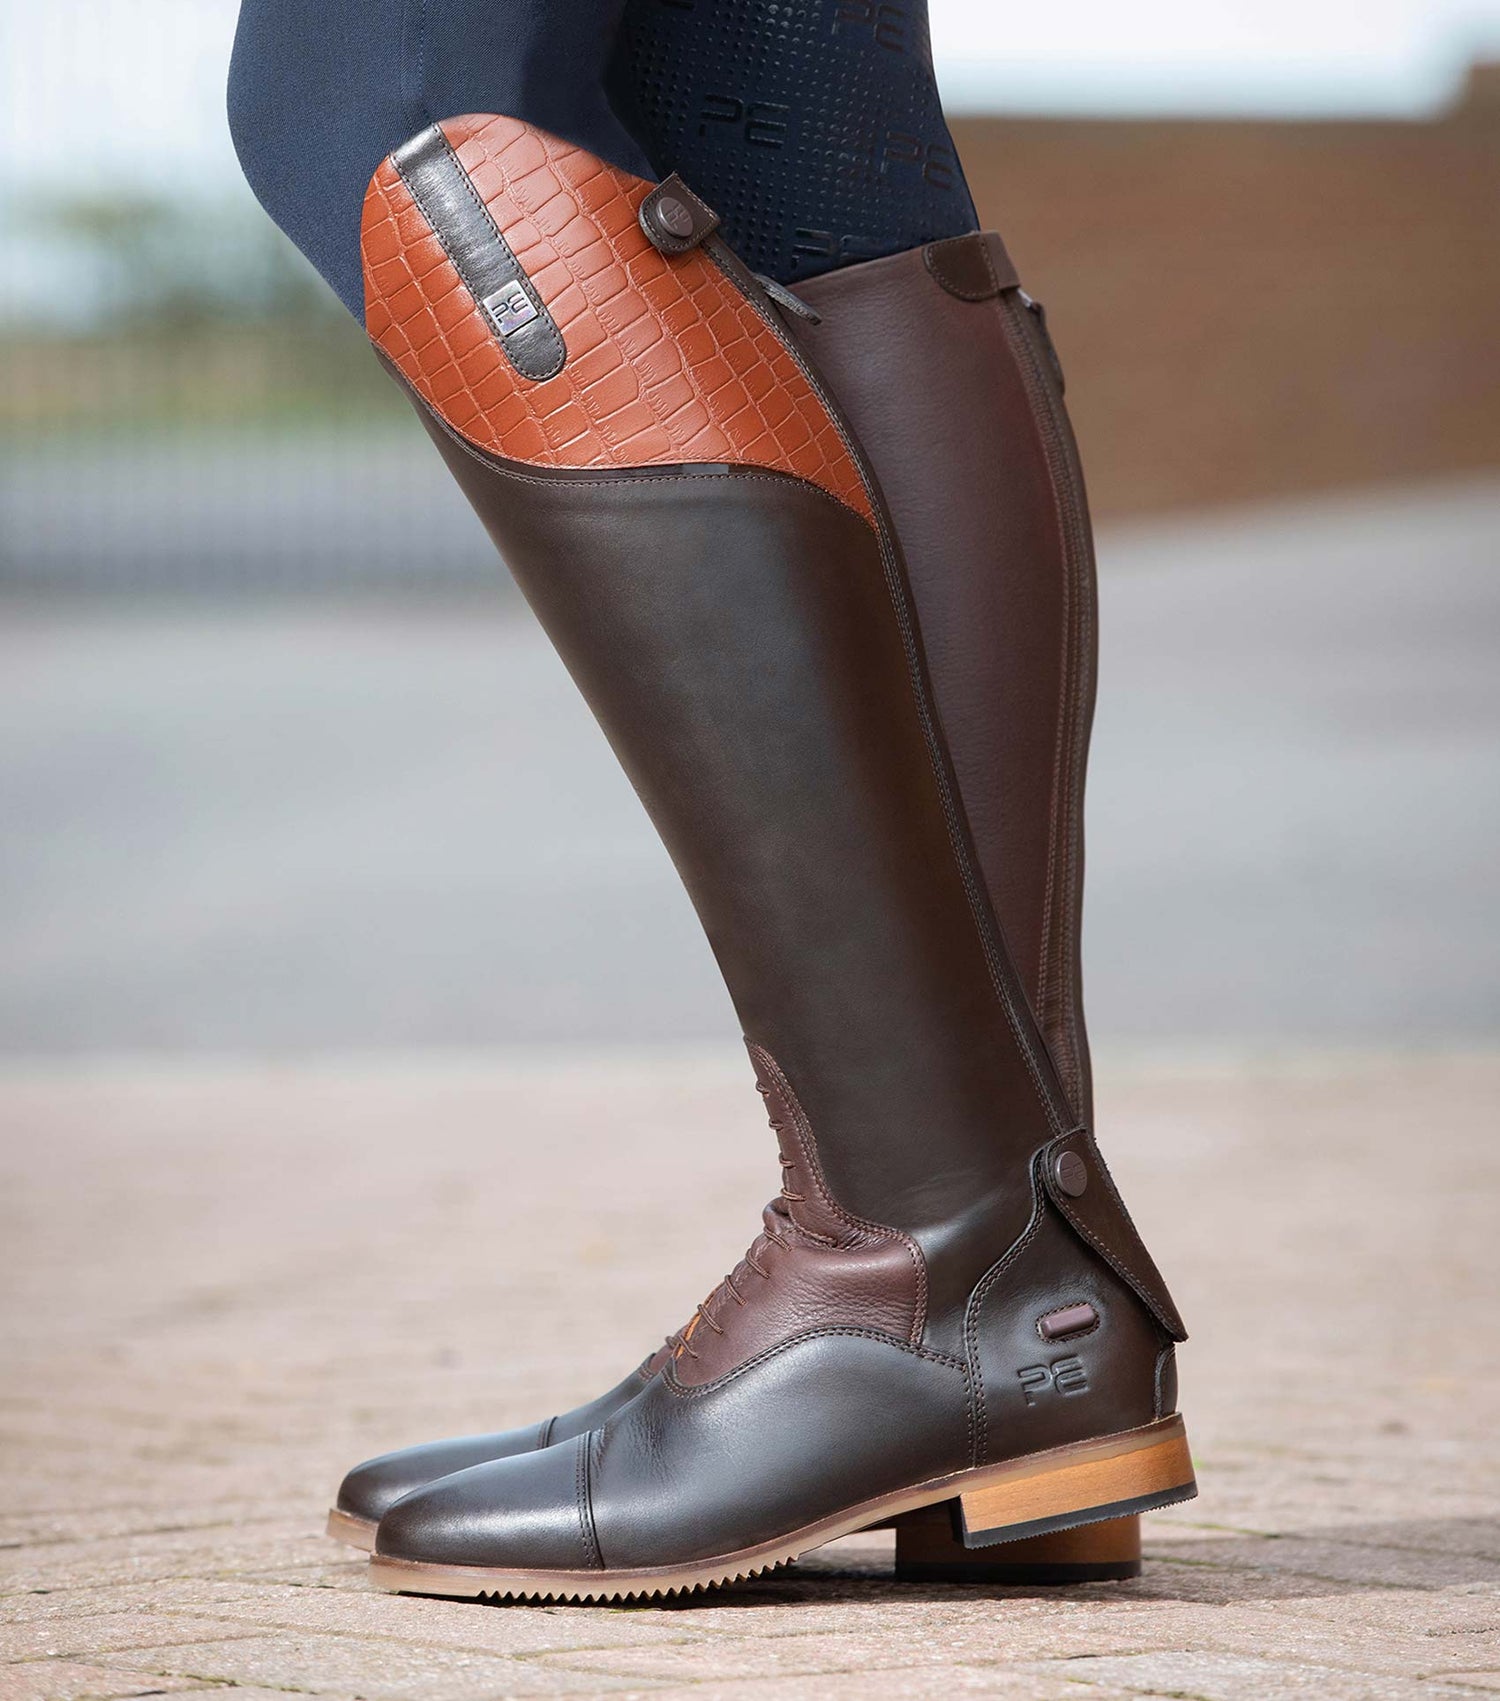 Premier Equine Passaggio Ladies Leather Field Tall Riding Boot